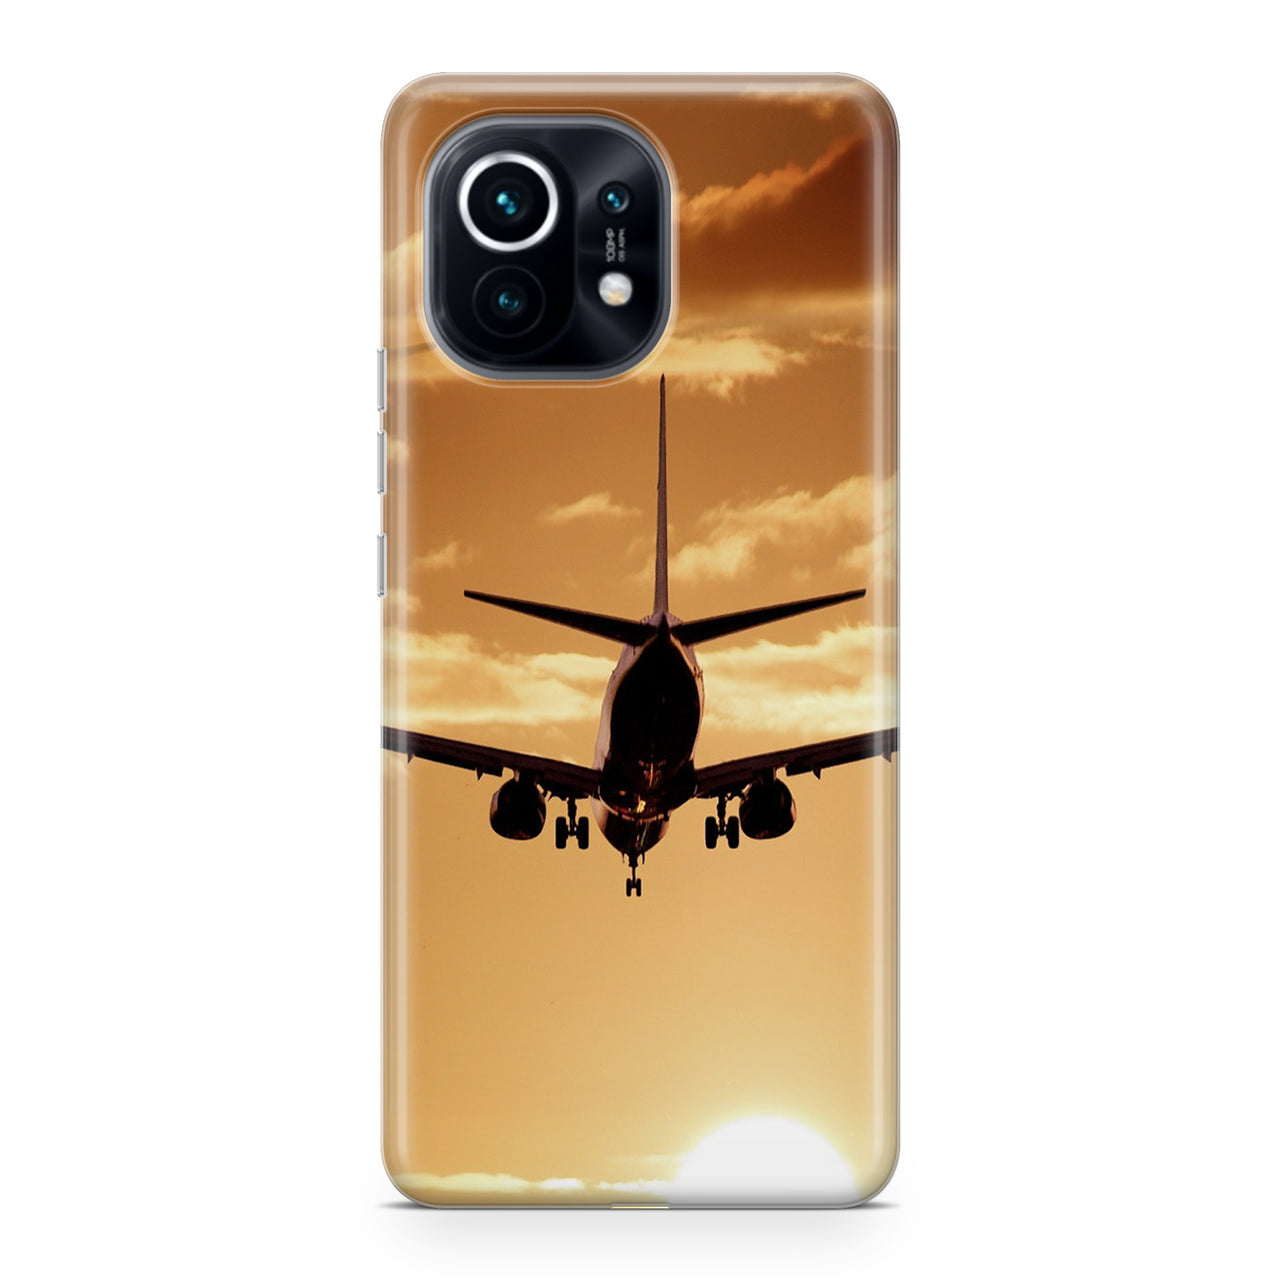 Two Aeroplanes During Sunset Designed Xiaomi Cases